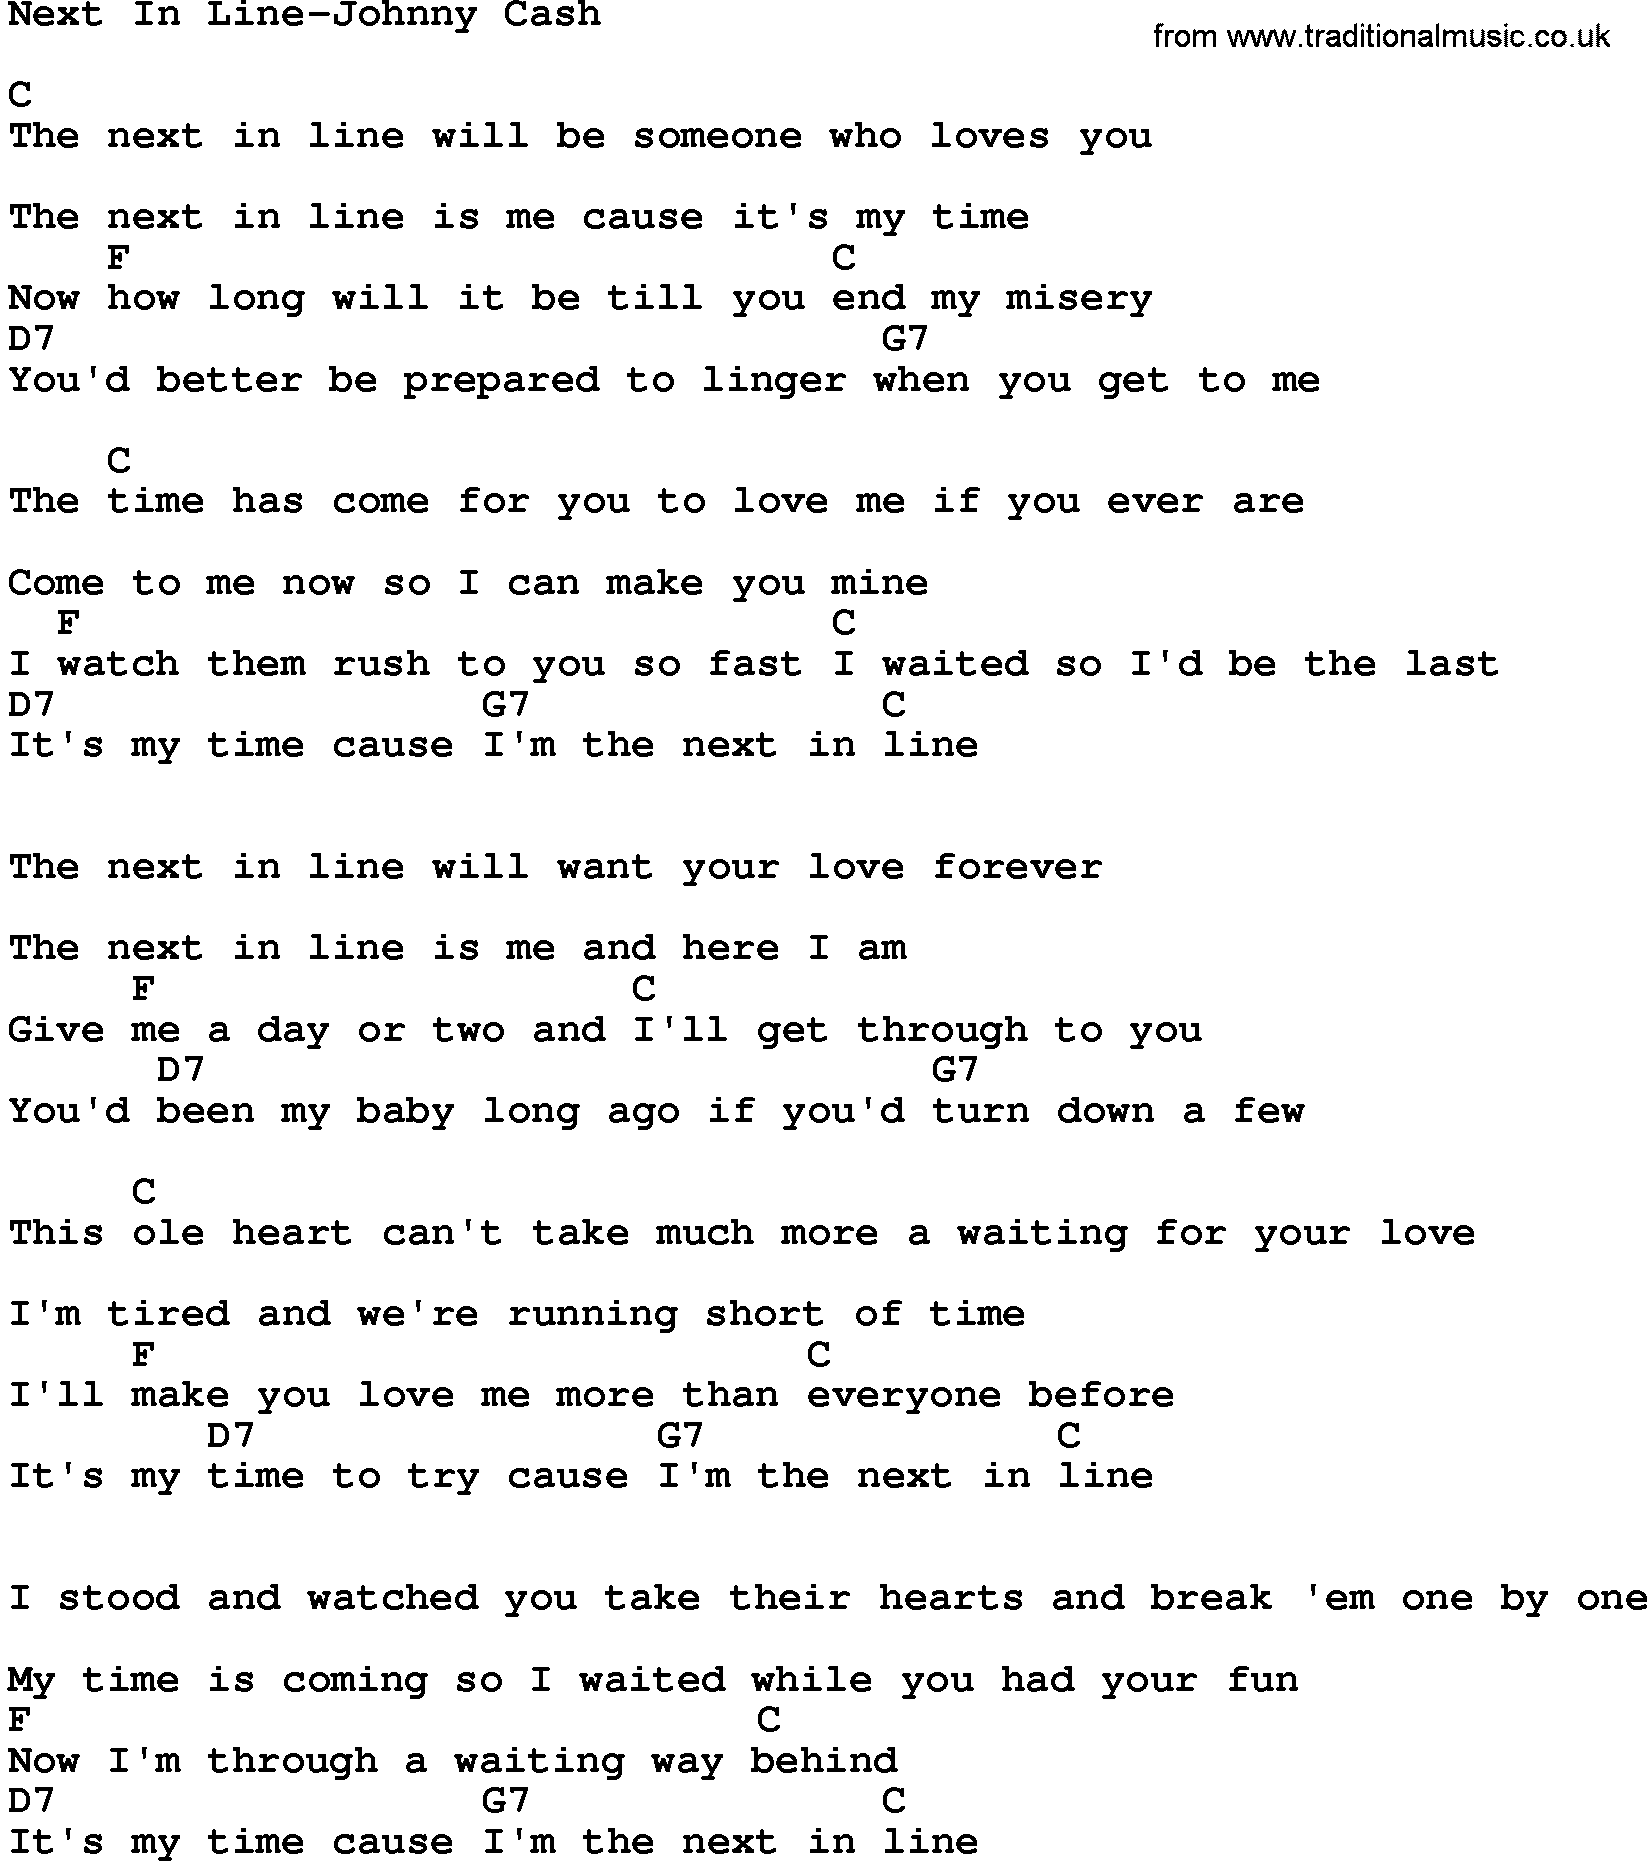 Country music song: Next In Line-Johnny Cash lyrics and chords